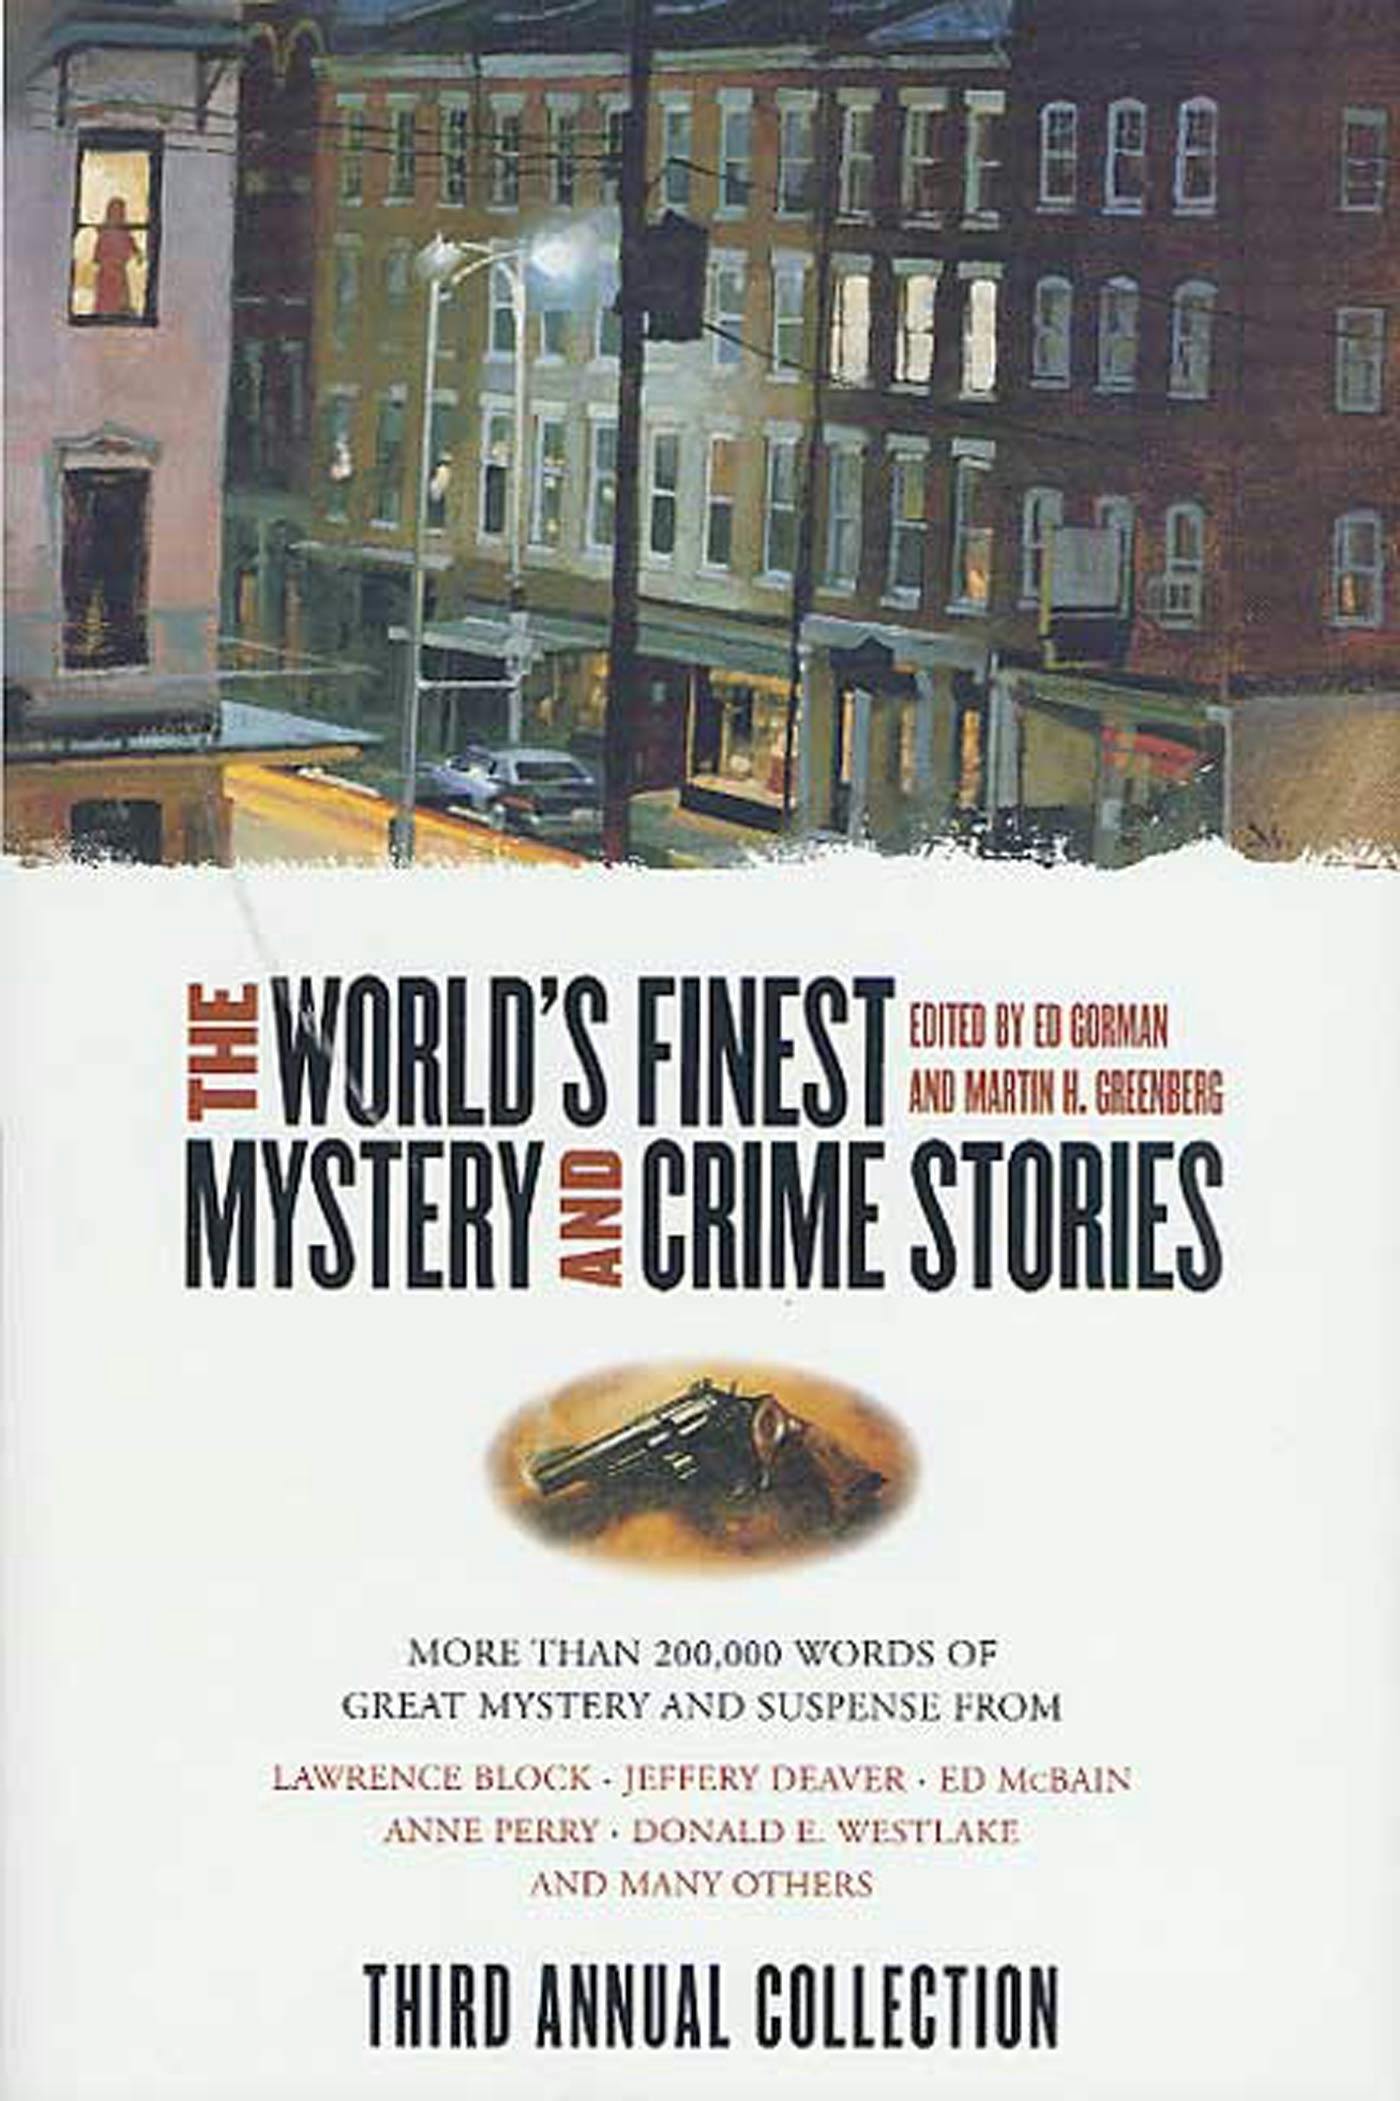 Cover for the book titled as: The World's Finest Mystery and Crime Stories: 3